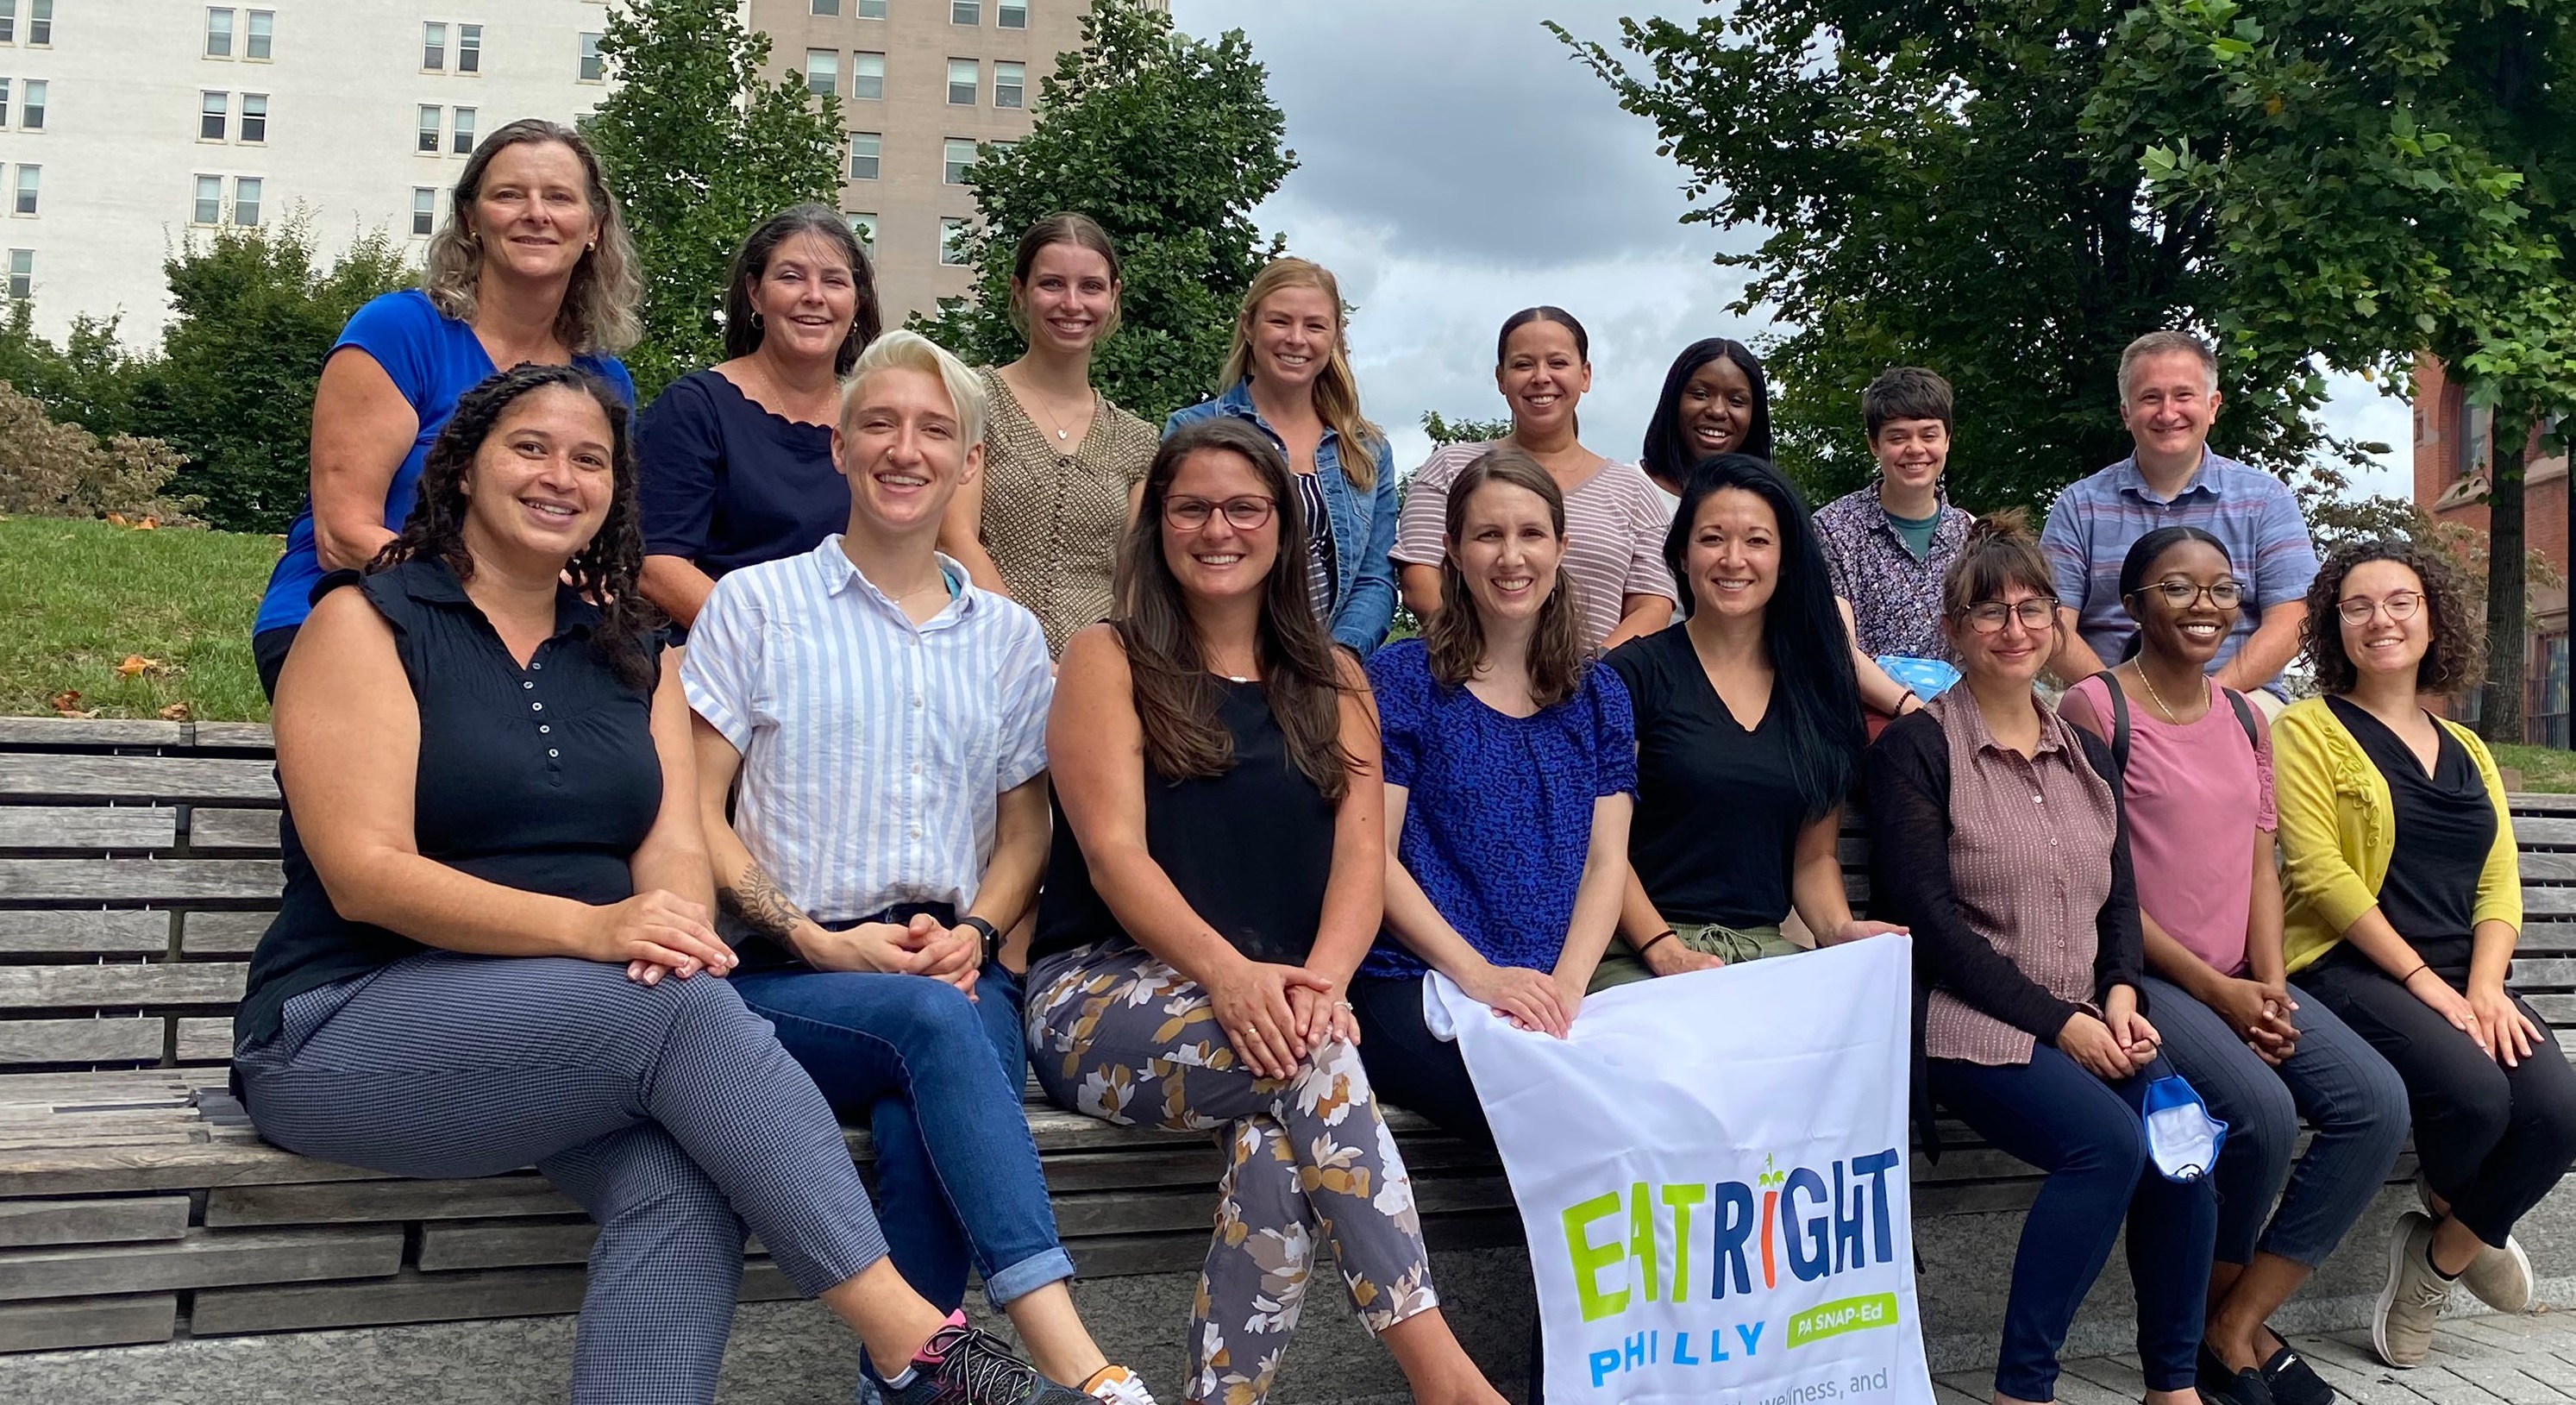 The Eat Right Philly nutrition team sitting as a group outdoors in front of a tree and building.